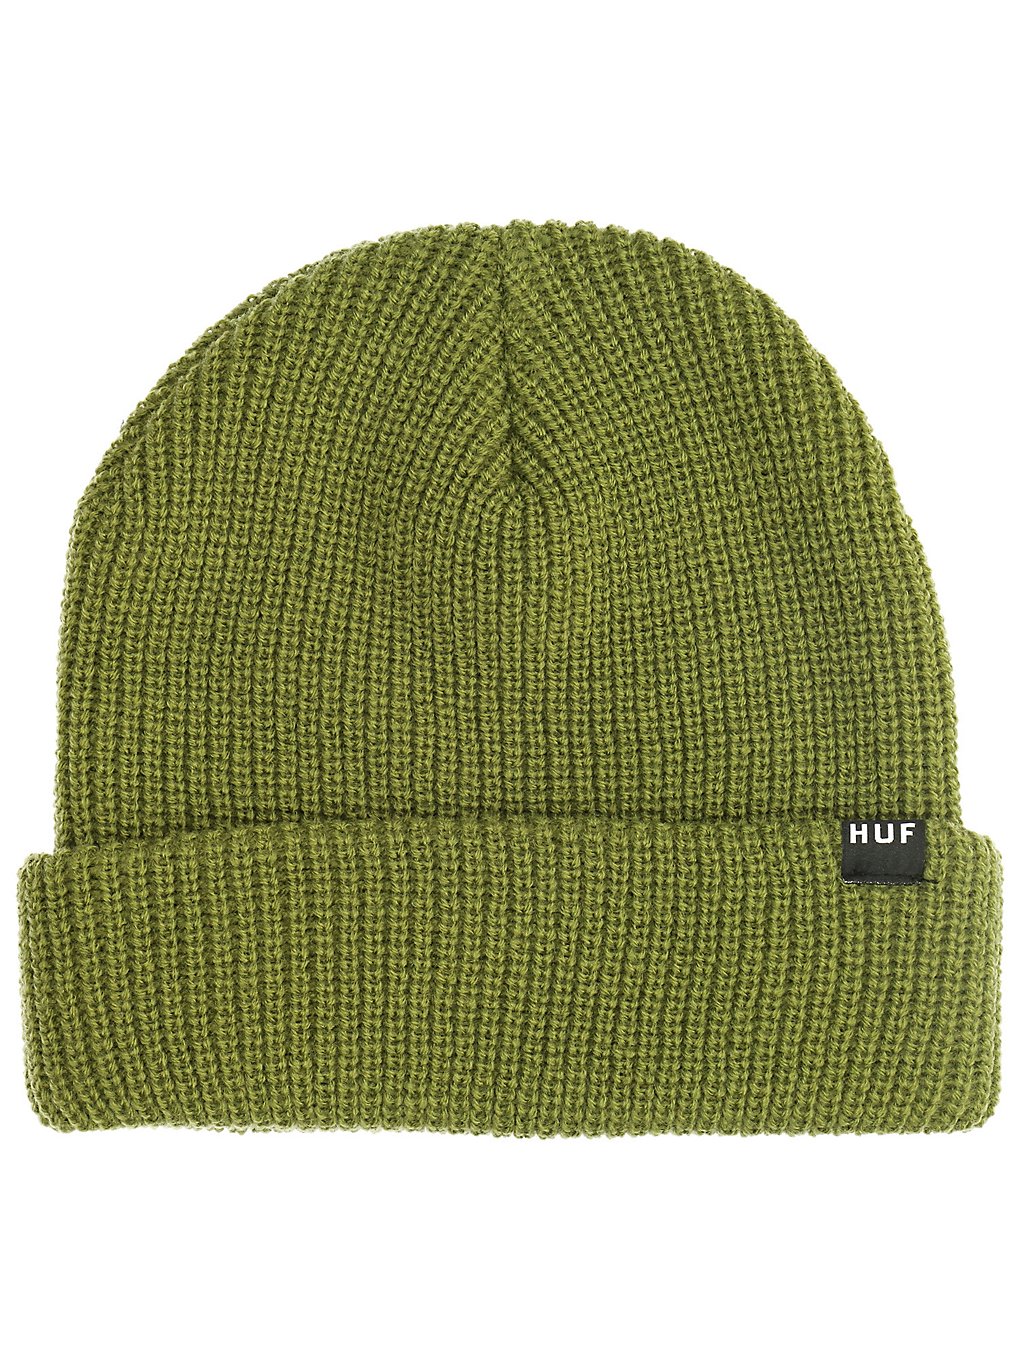 HUF Essentials Usual Beanie olive